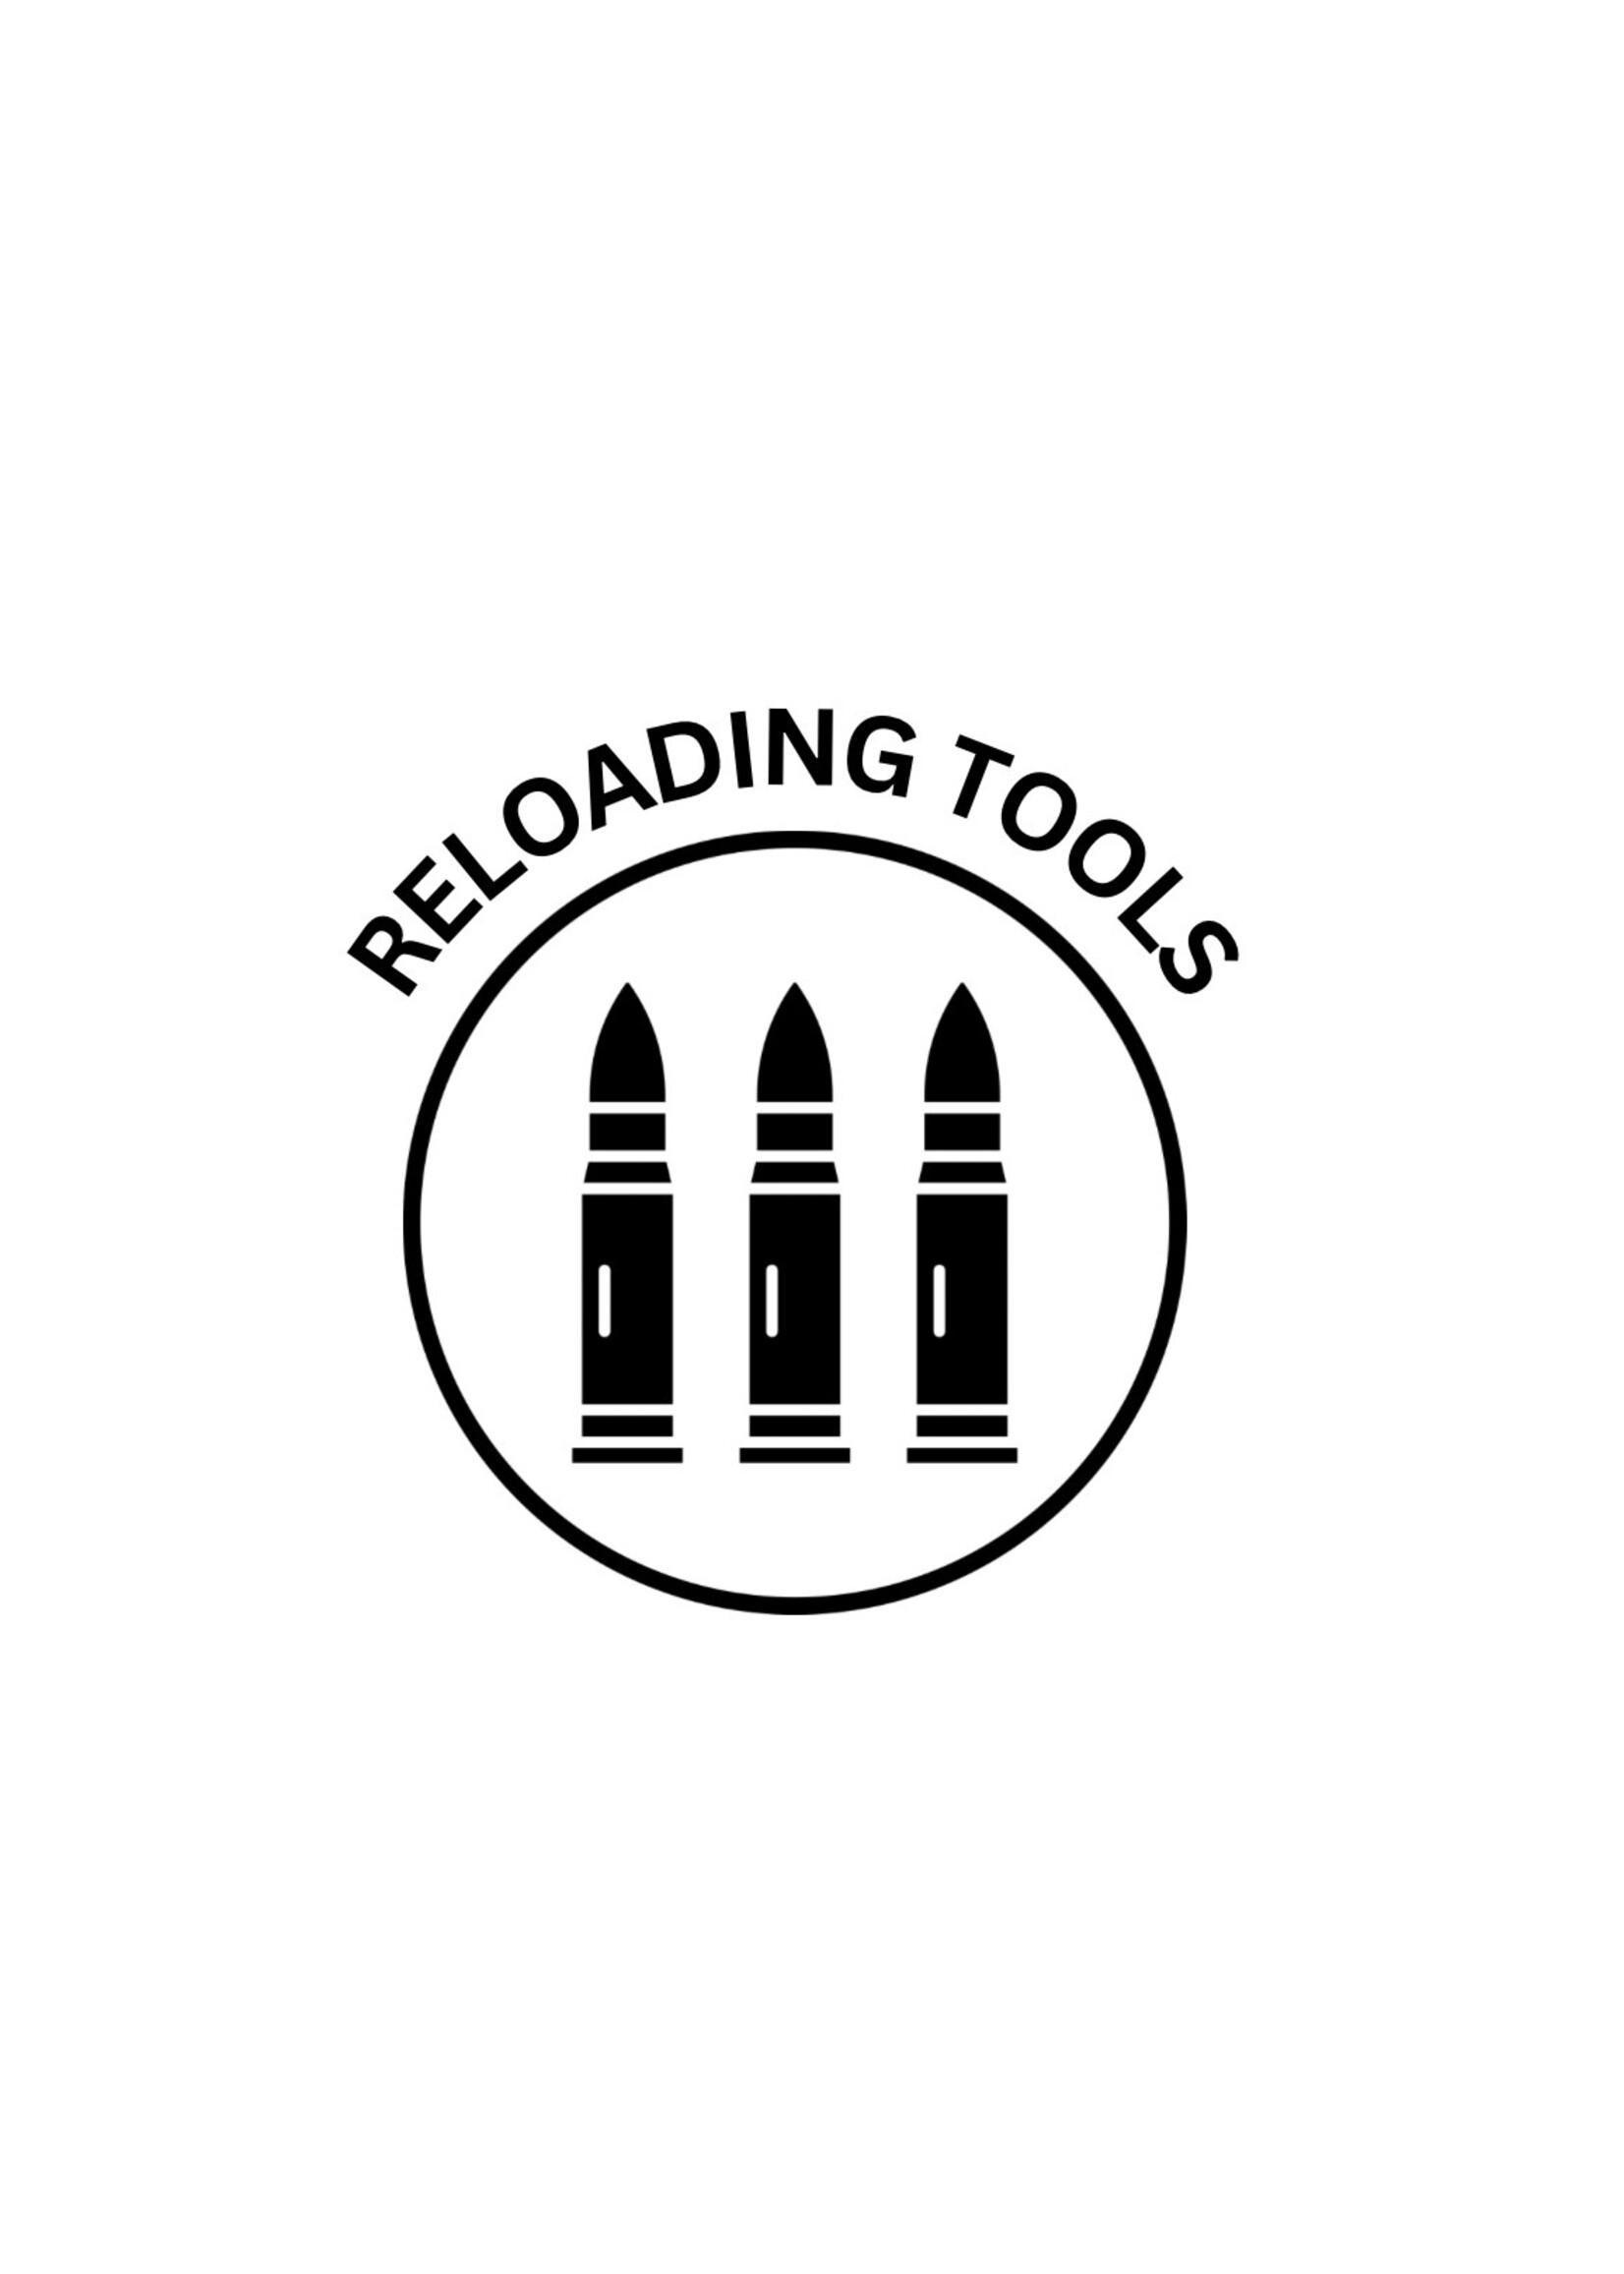 USED RELOADING TOOLS